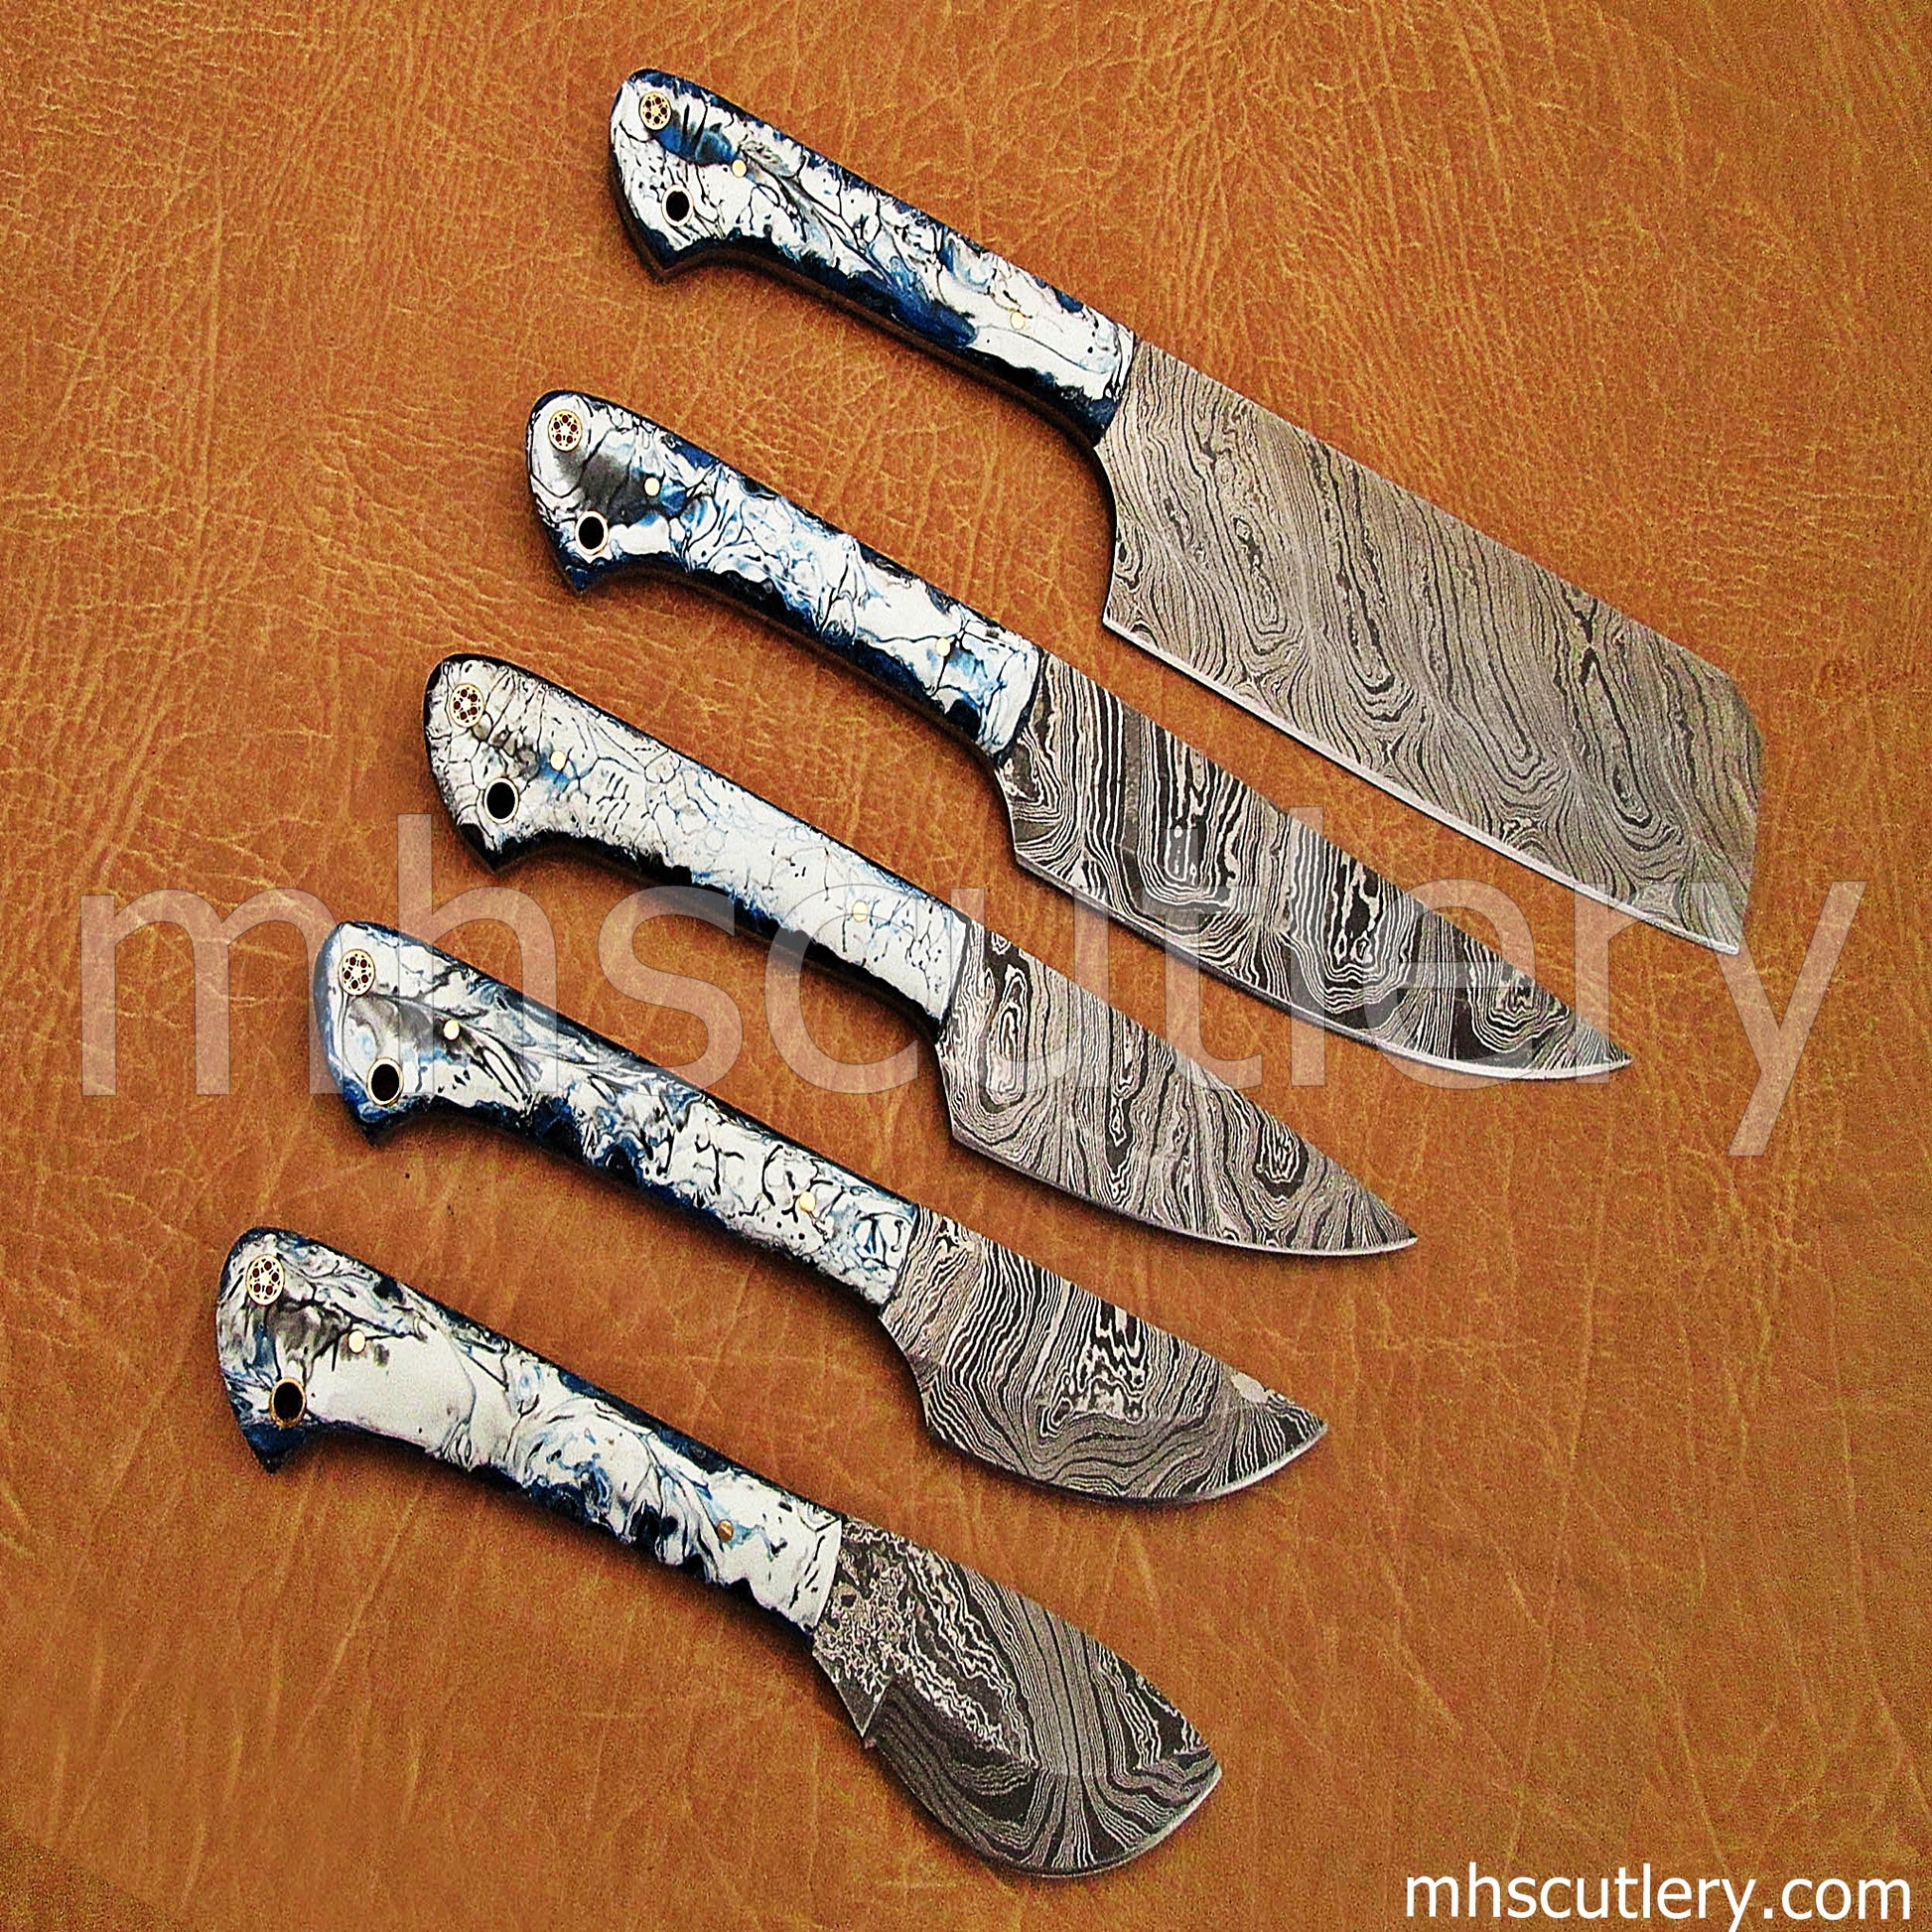 Hand Forged Damascus Steel Chef Set / 5 Pcs | mhscutlery